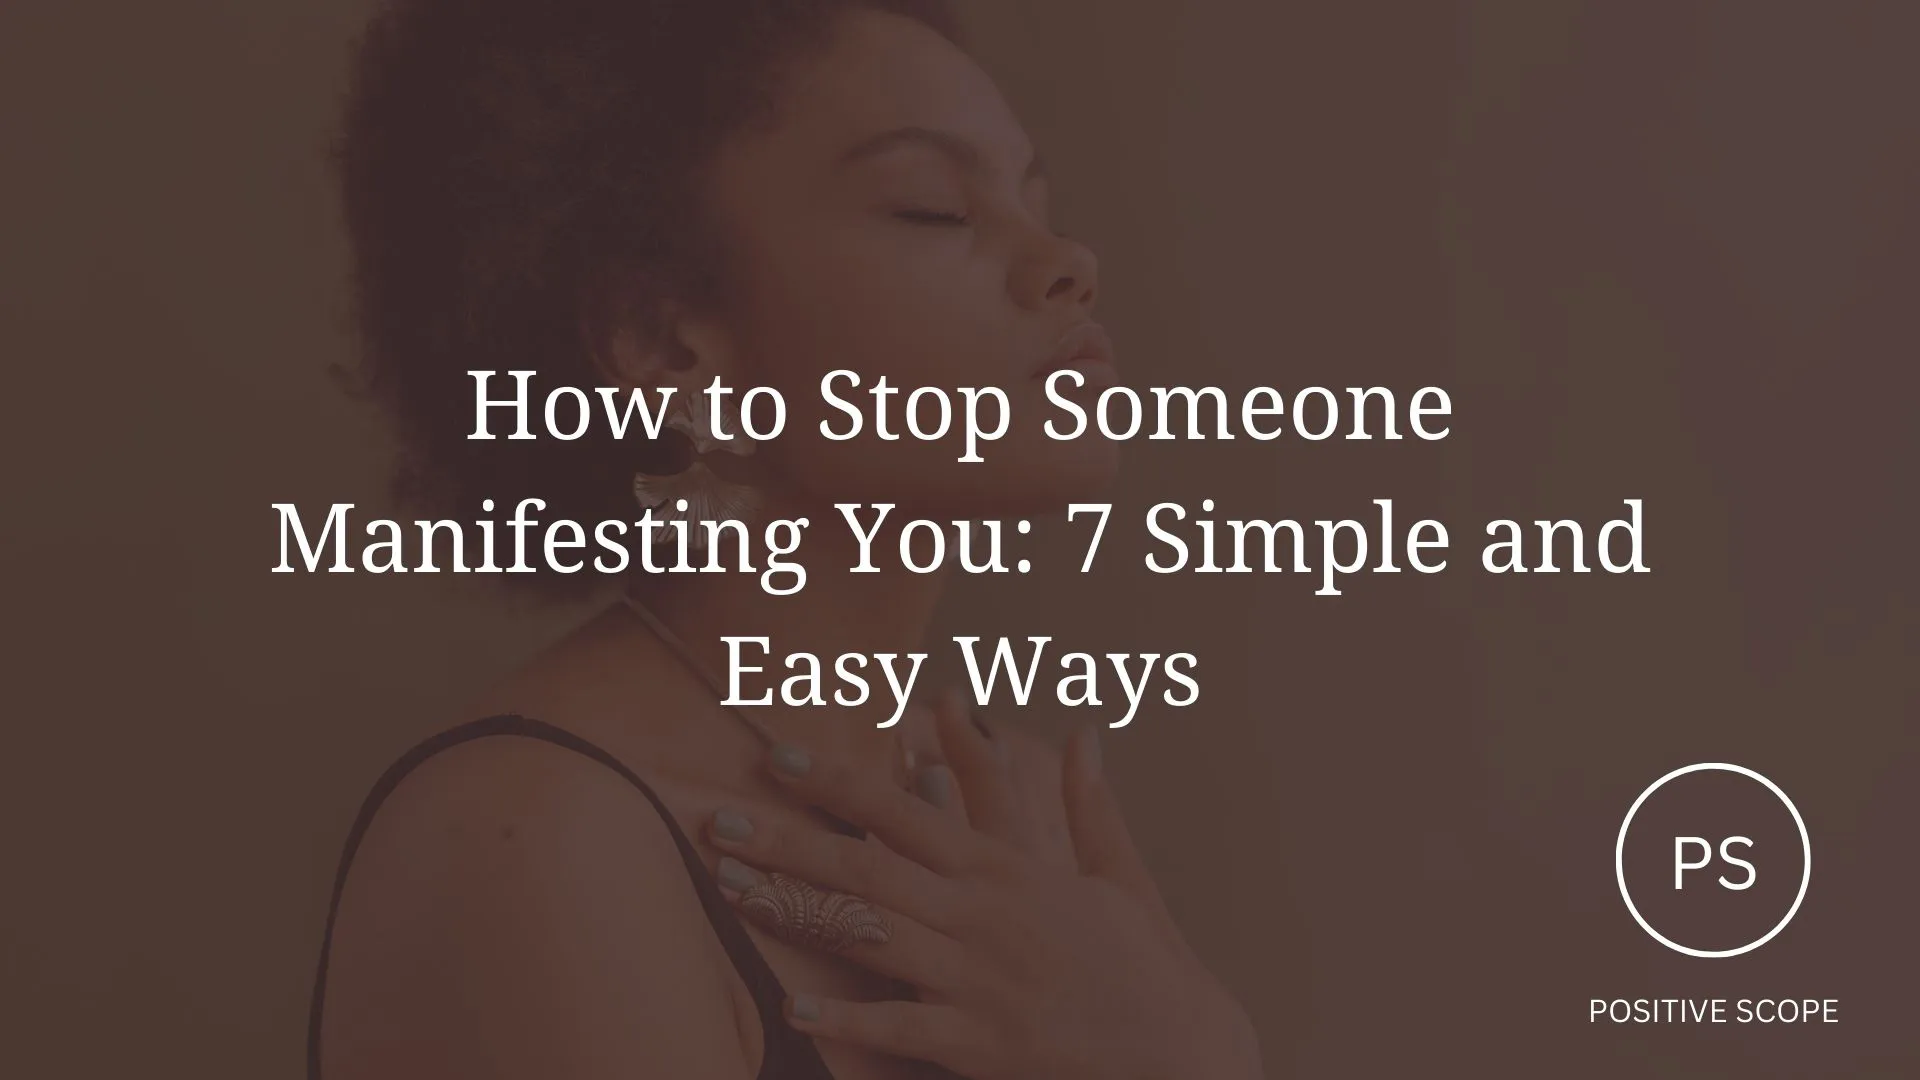 How to Stop Someone Manifesting You: 7 Simple and Easy Ways